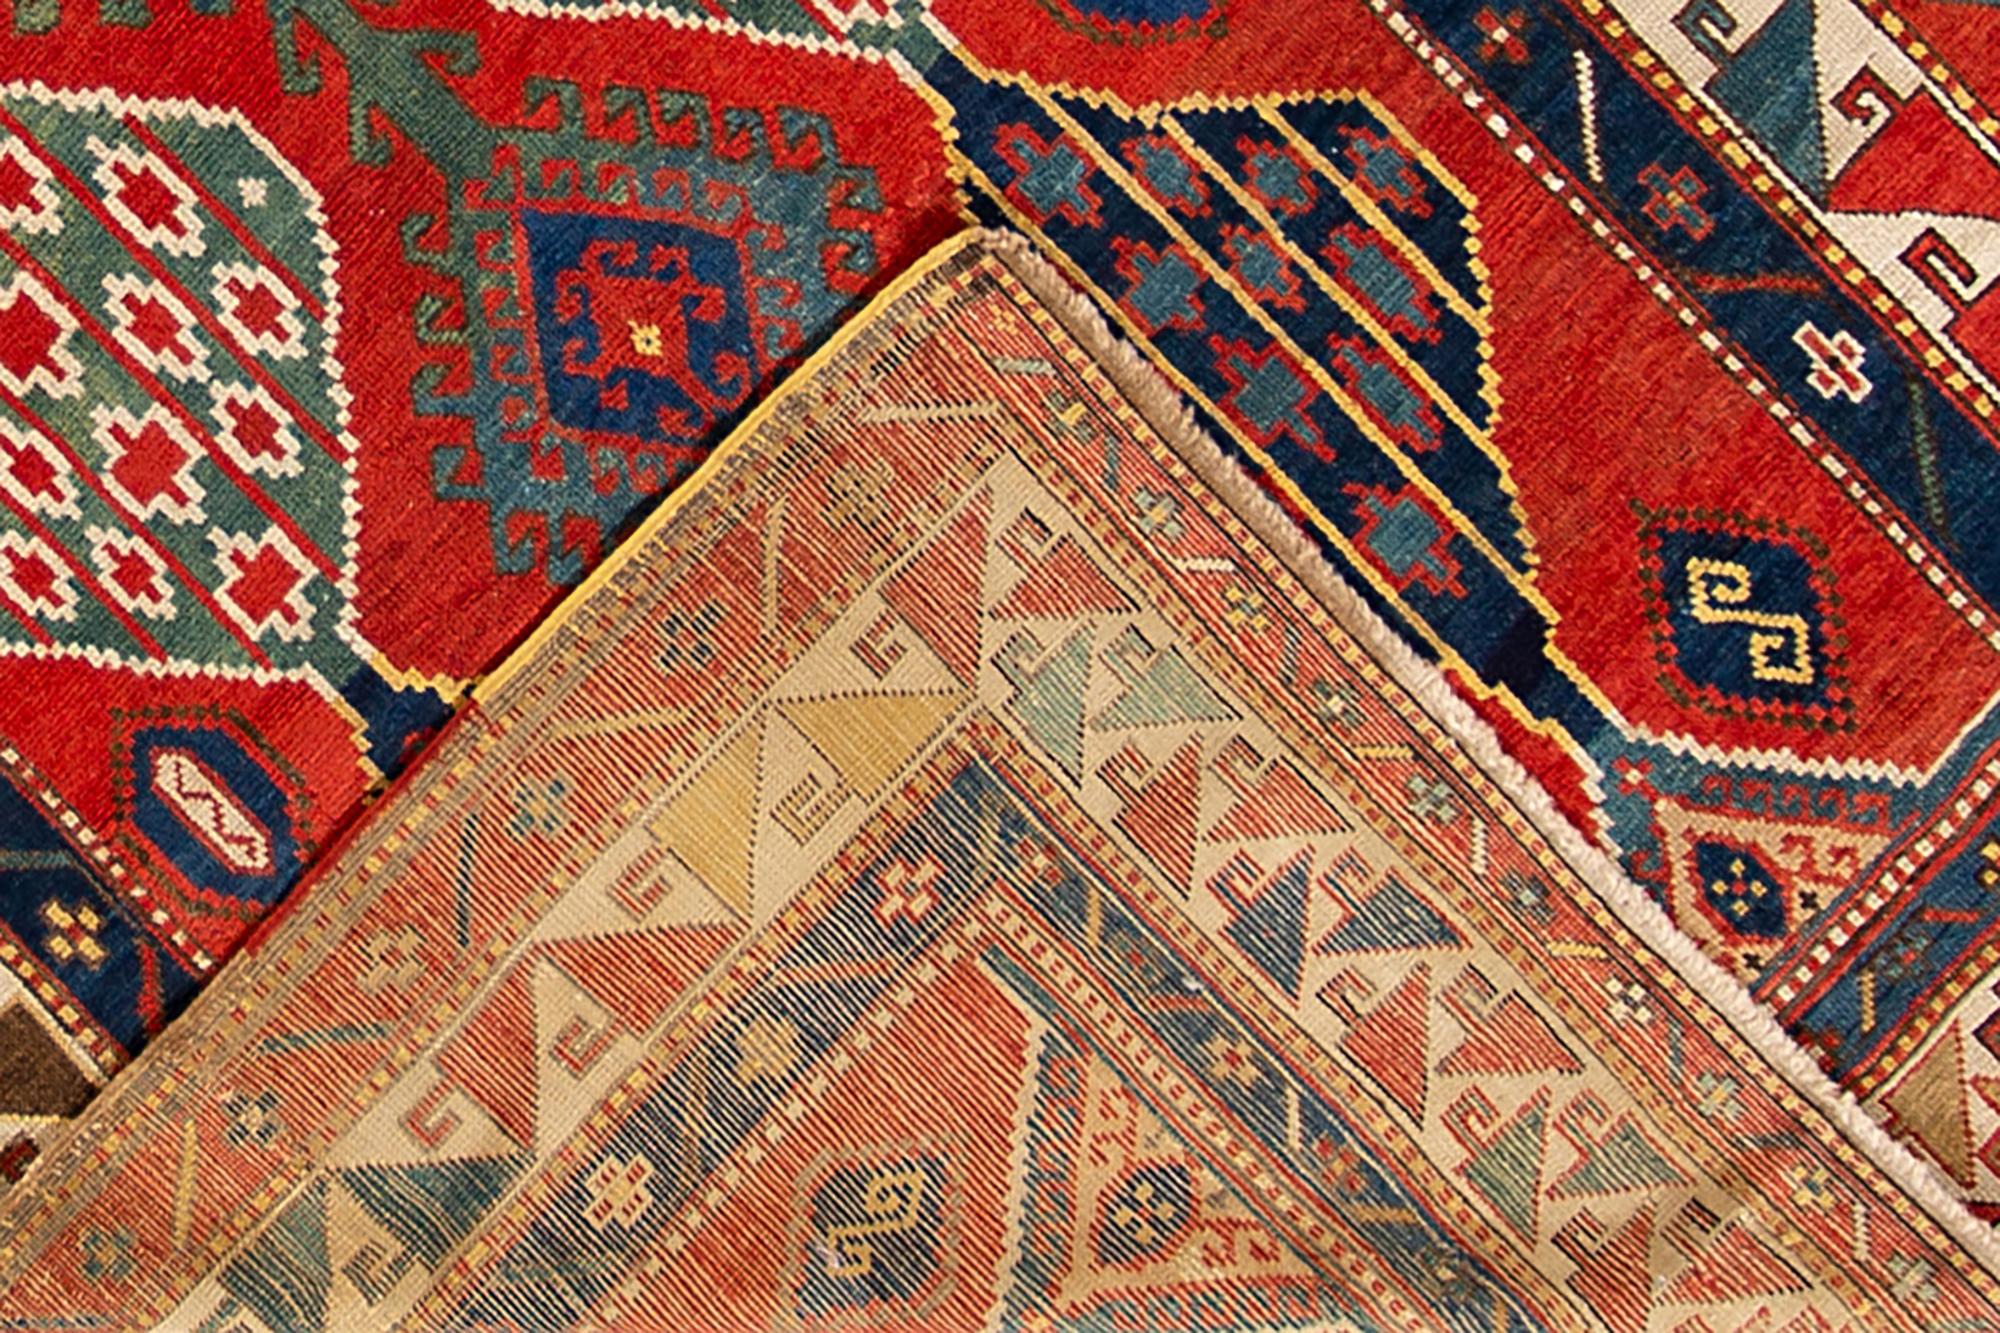 Late 19th century (1890s) Kazakh rug with a rust border and red field with a traditional design. Measures 4.07x8.